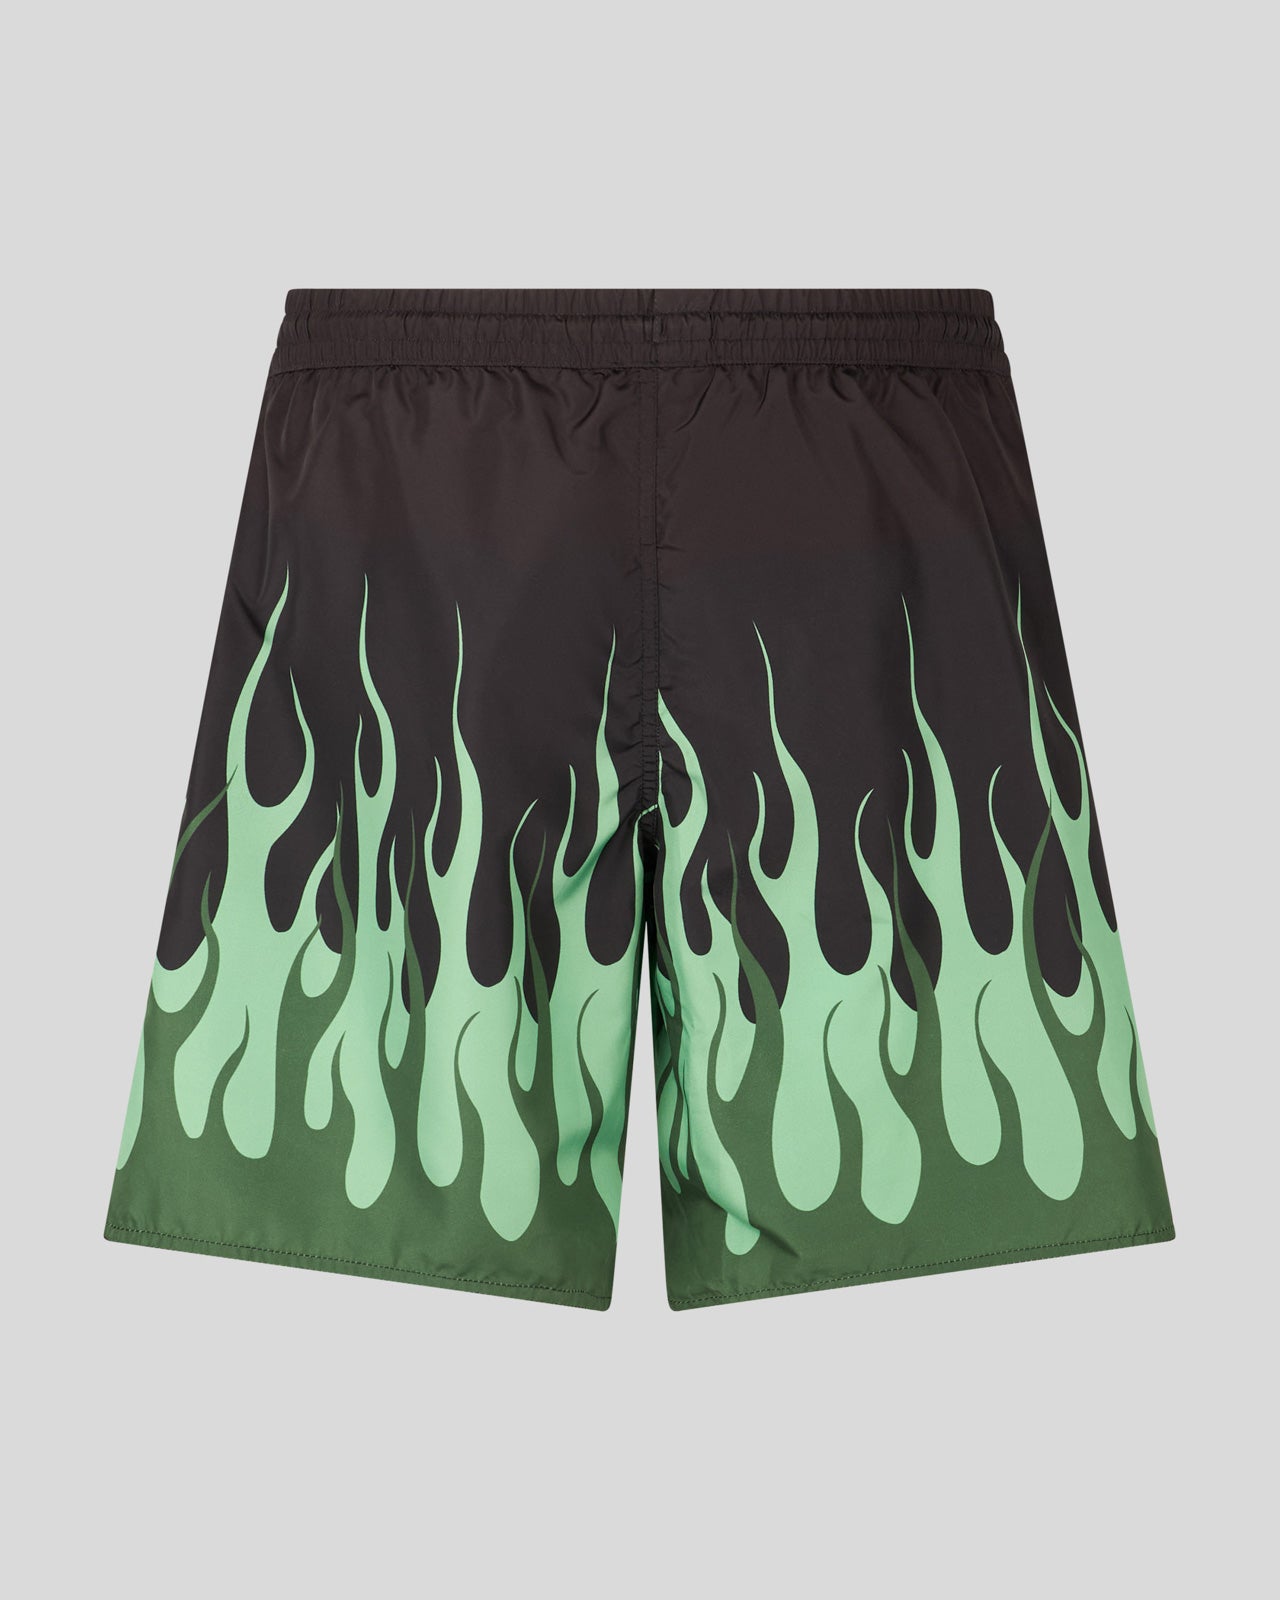 BLACK SWIMWEAR WITH DOUBLE GREEN FLAMES